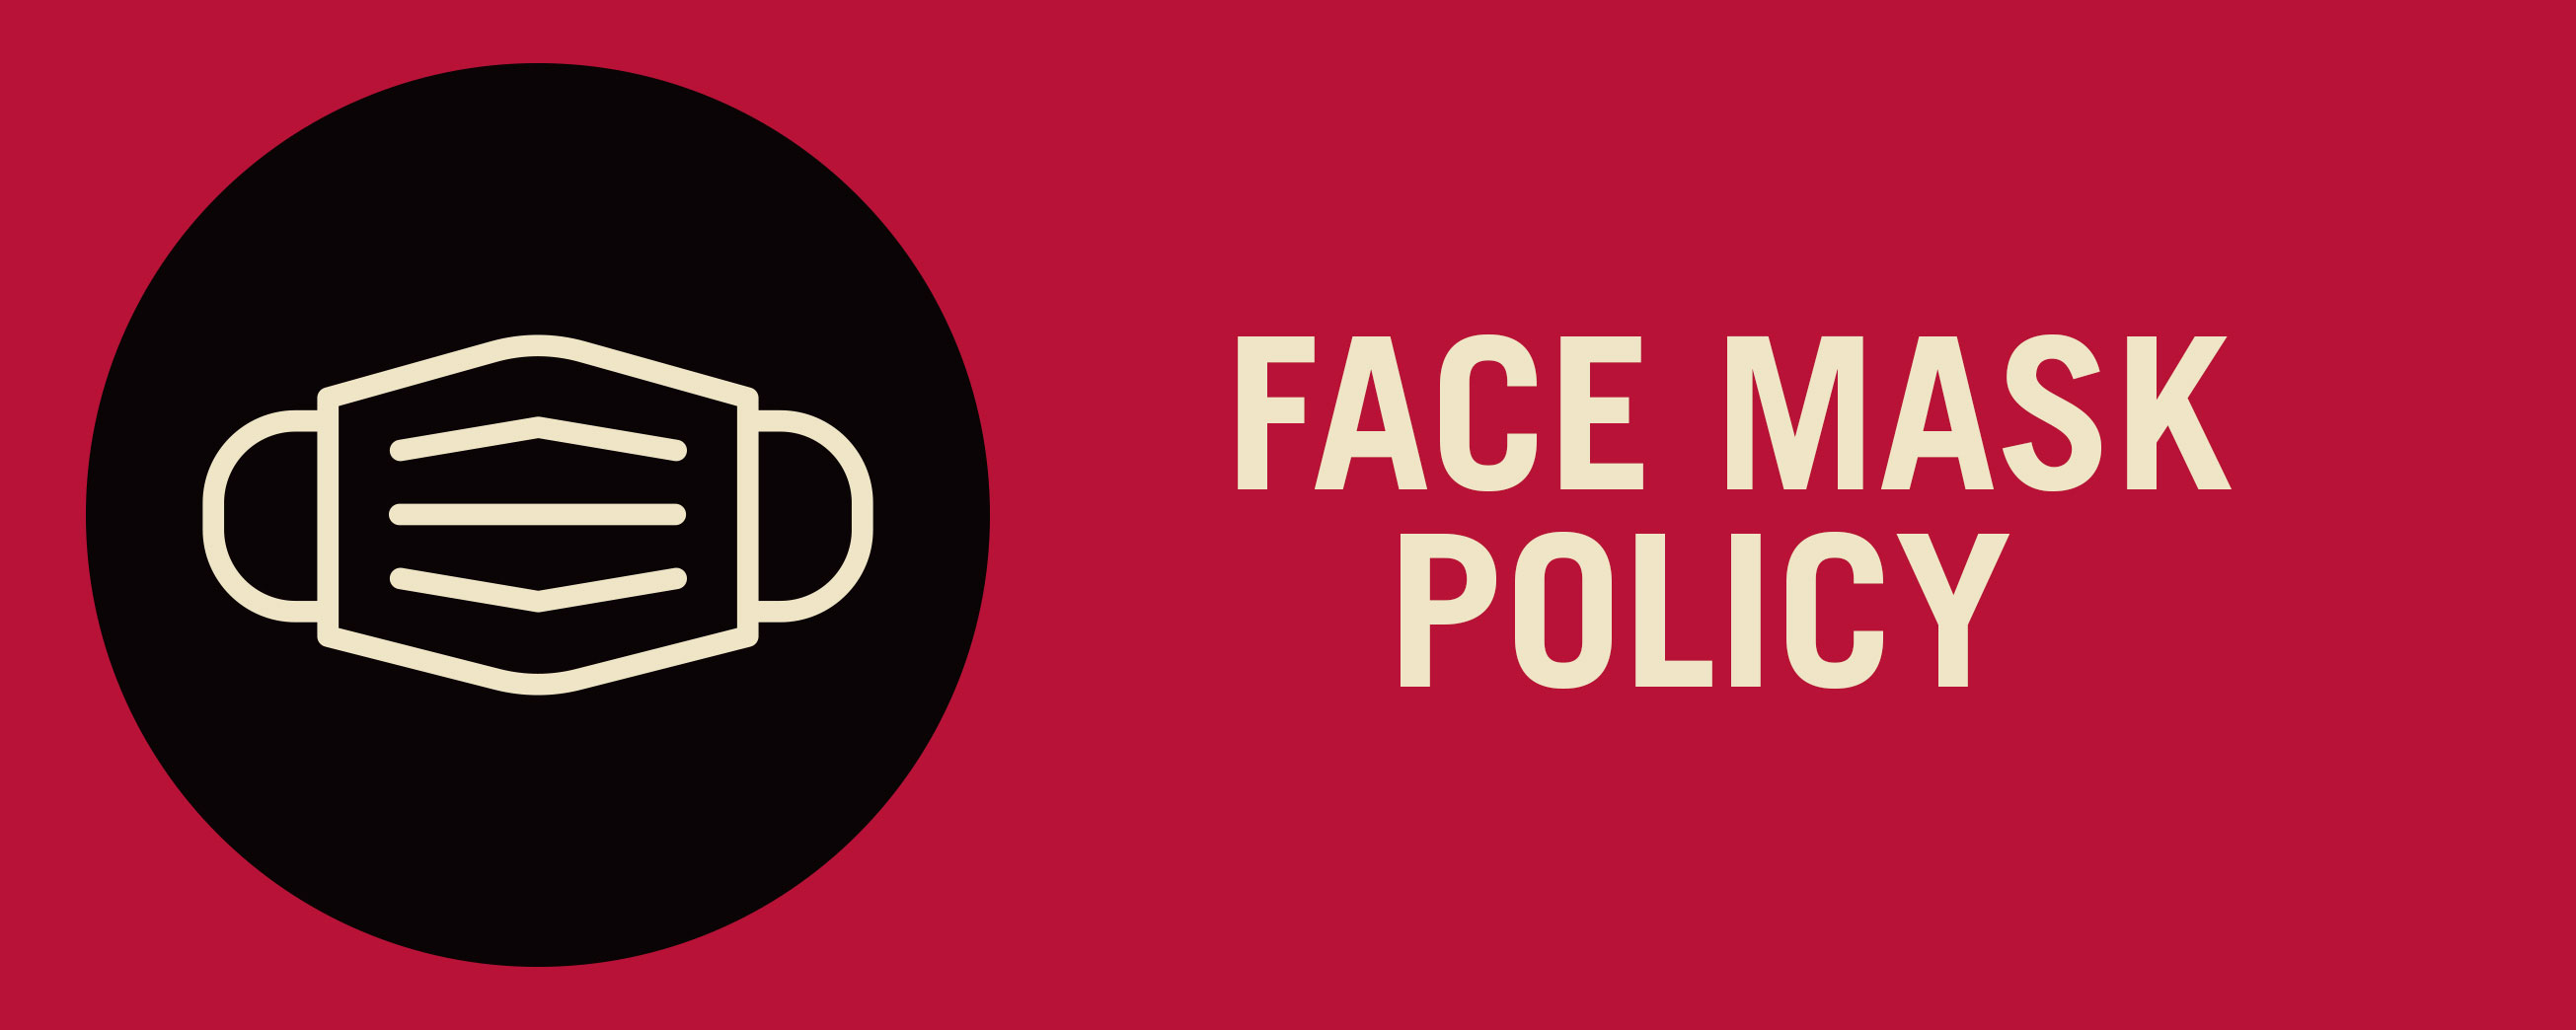 Face Mask Policy